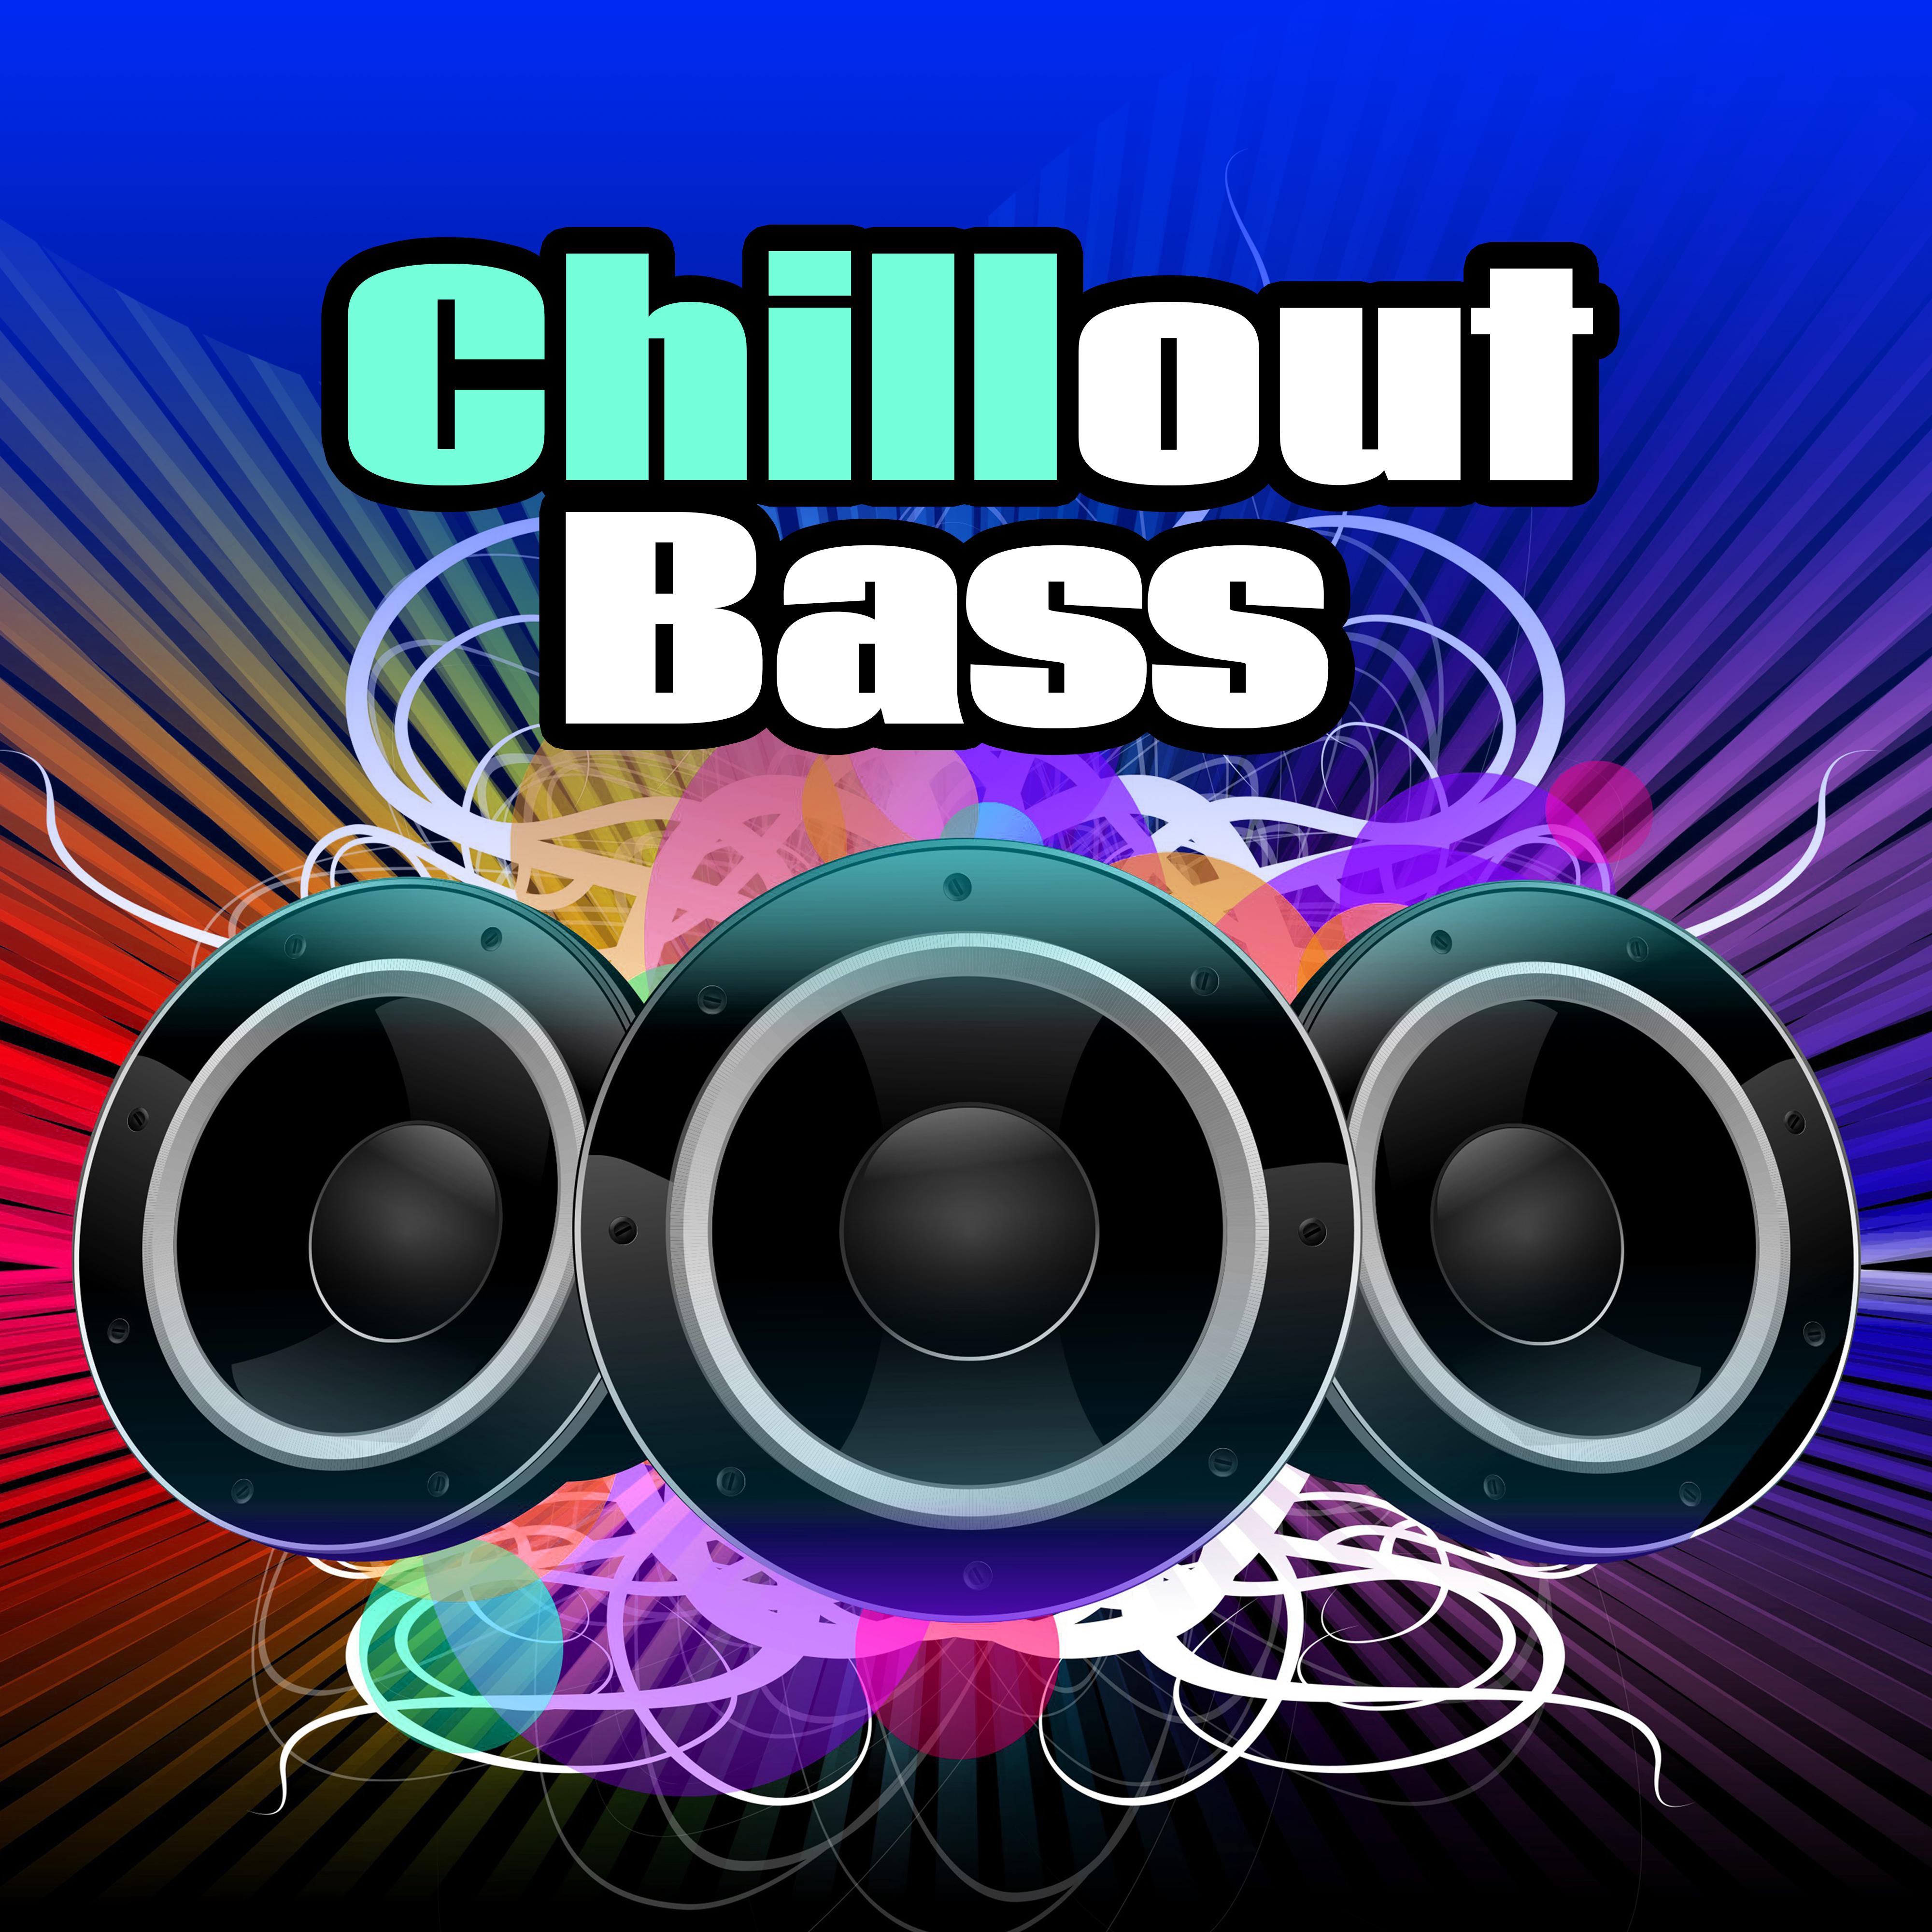 Chillout Bass  Chillout Downbeats, Electronic Vibes, Ambient Music, Chillout Session